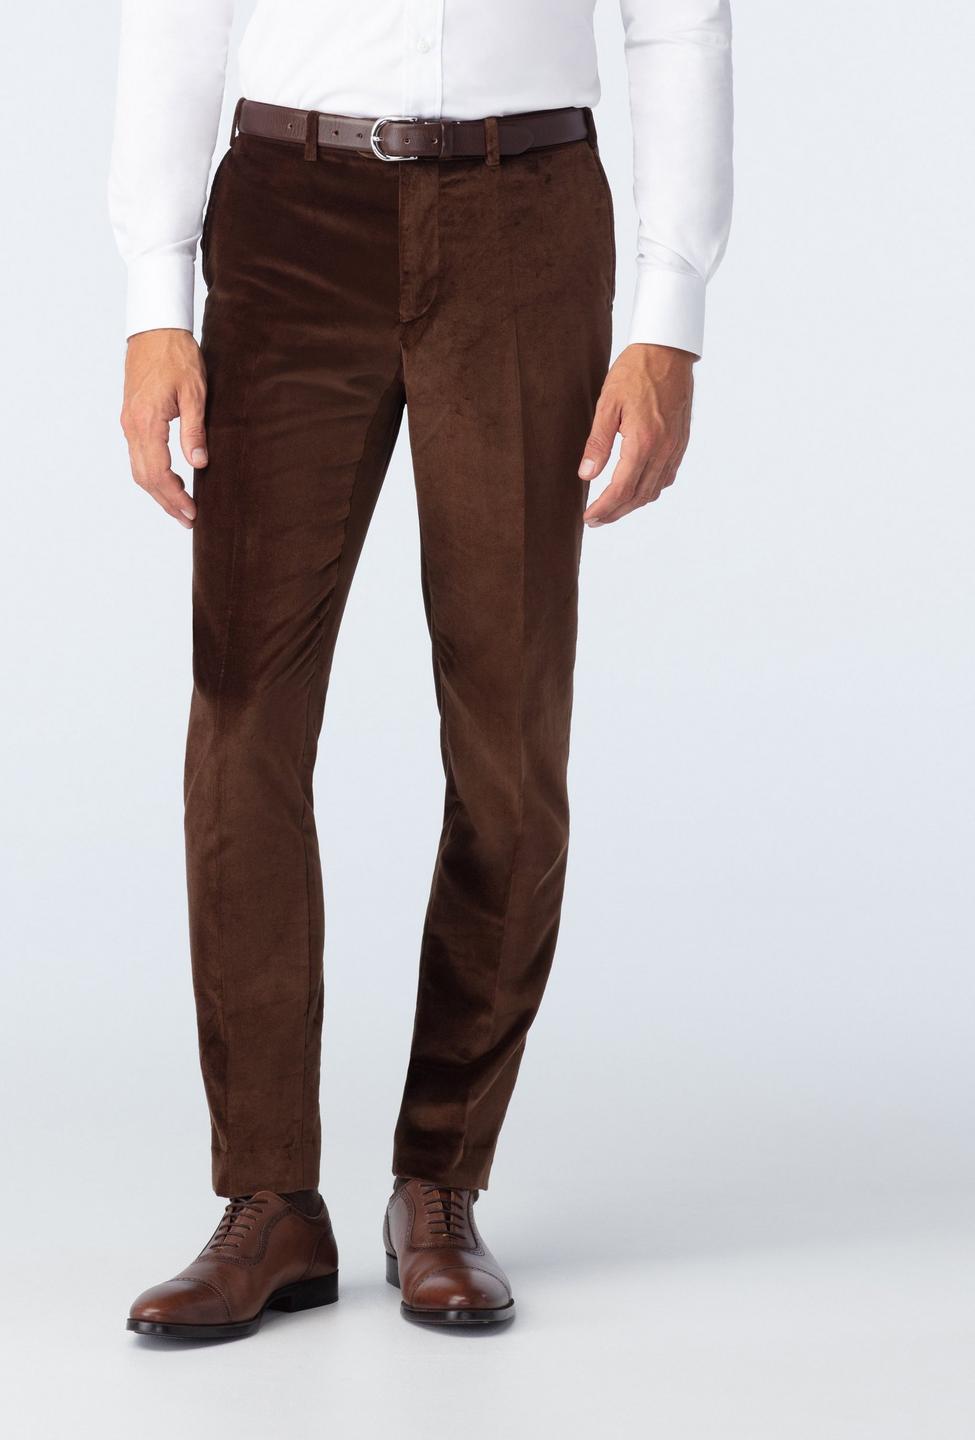 Brown pants - Harford Solid Design from Premium Indochino Collection